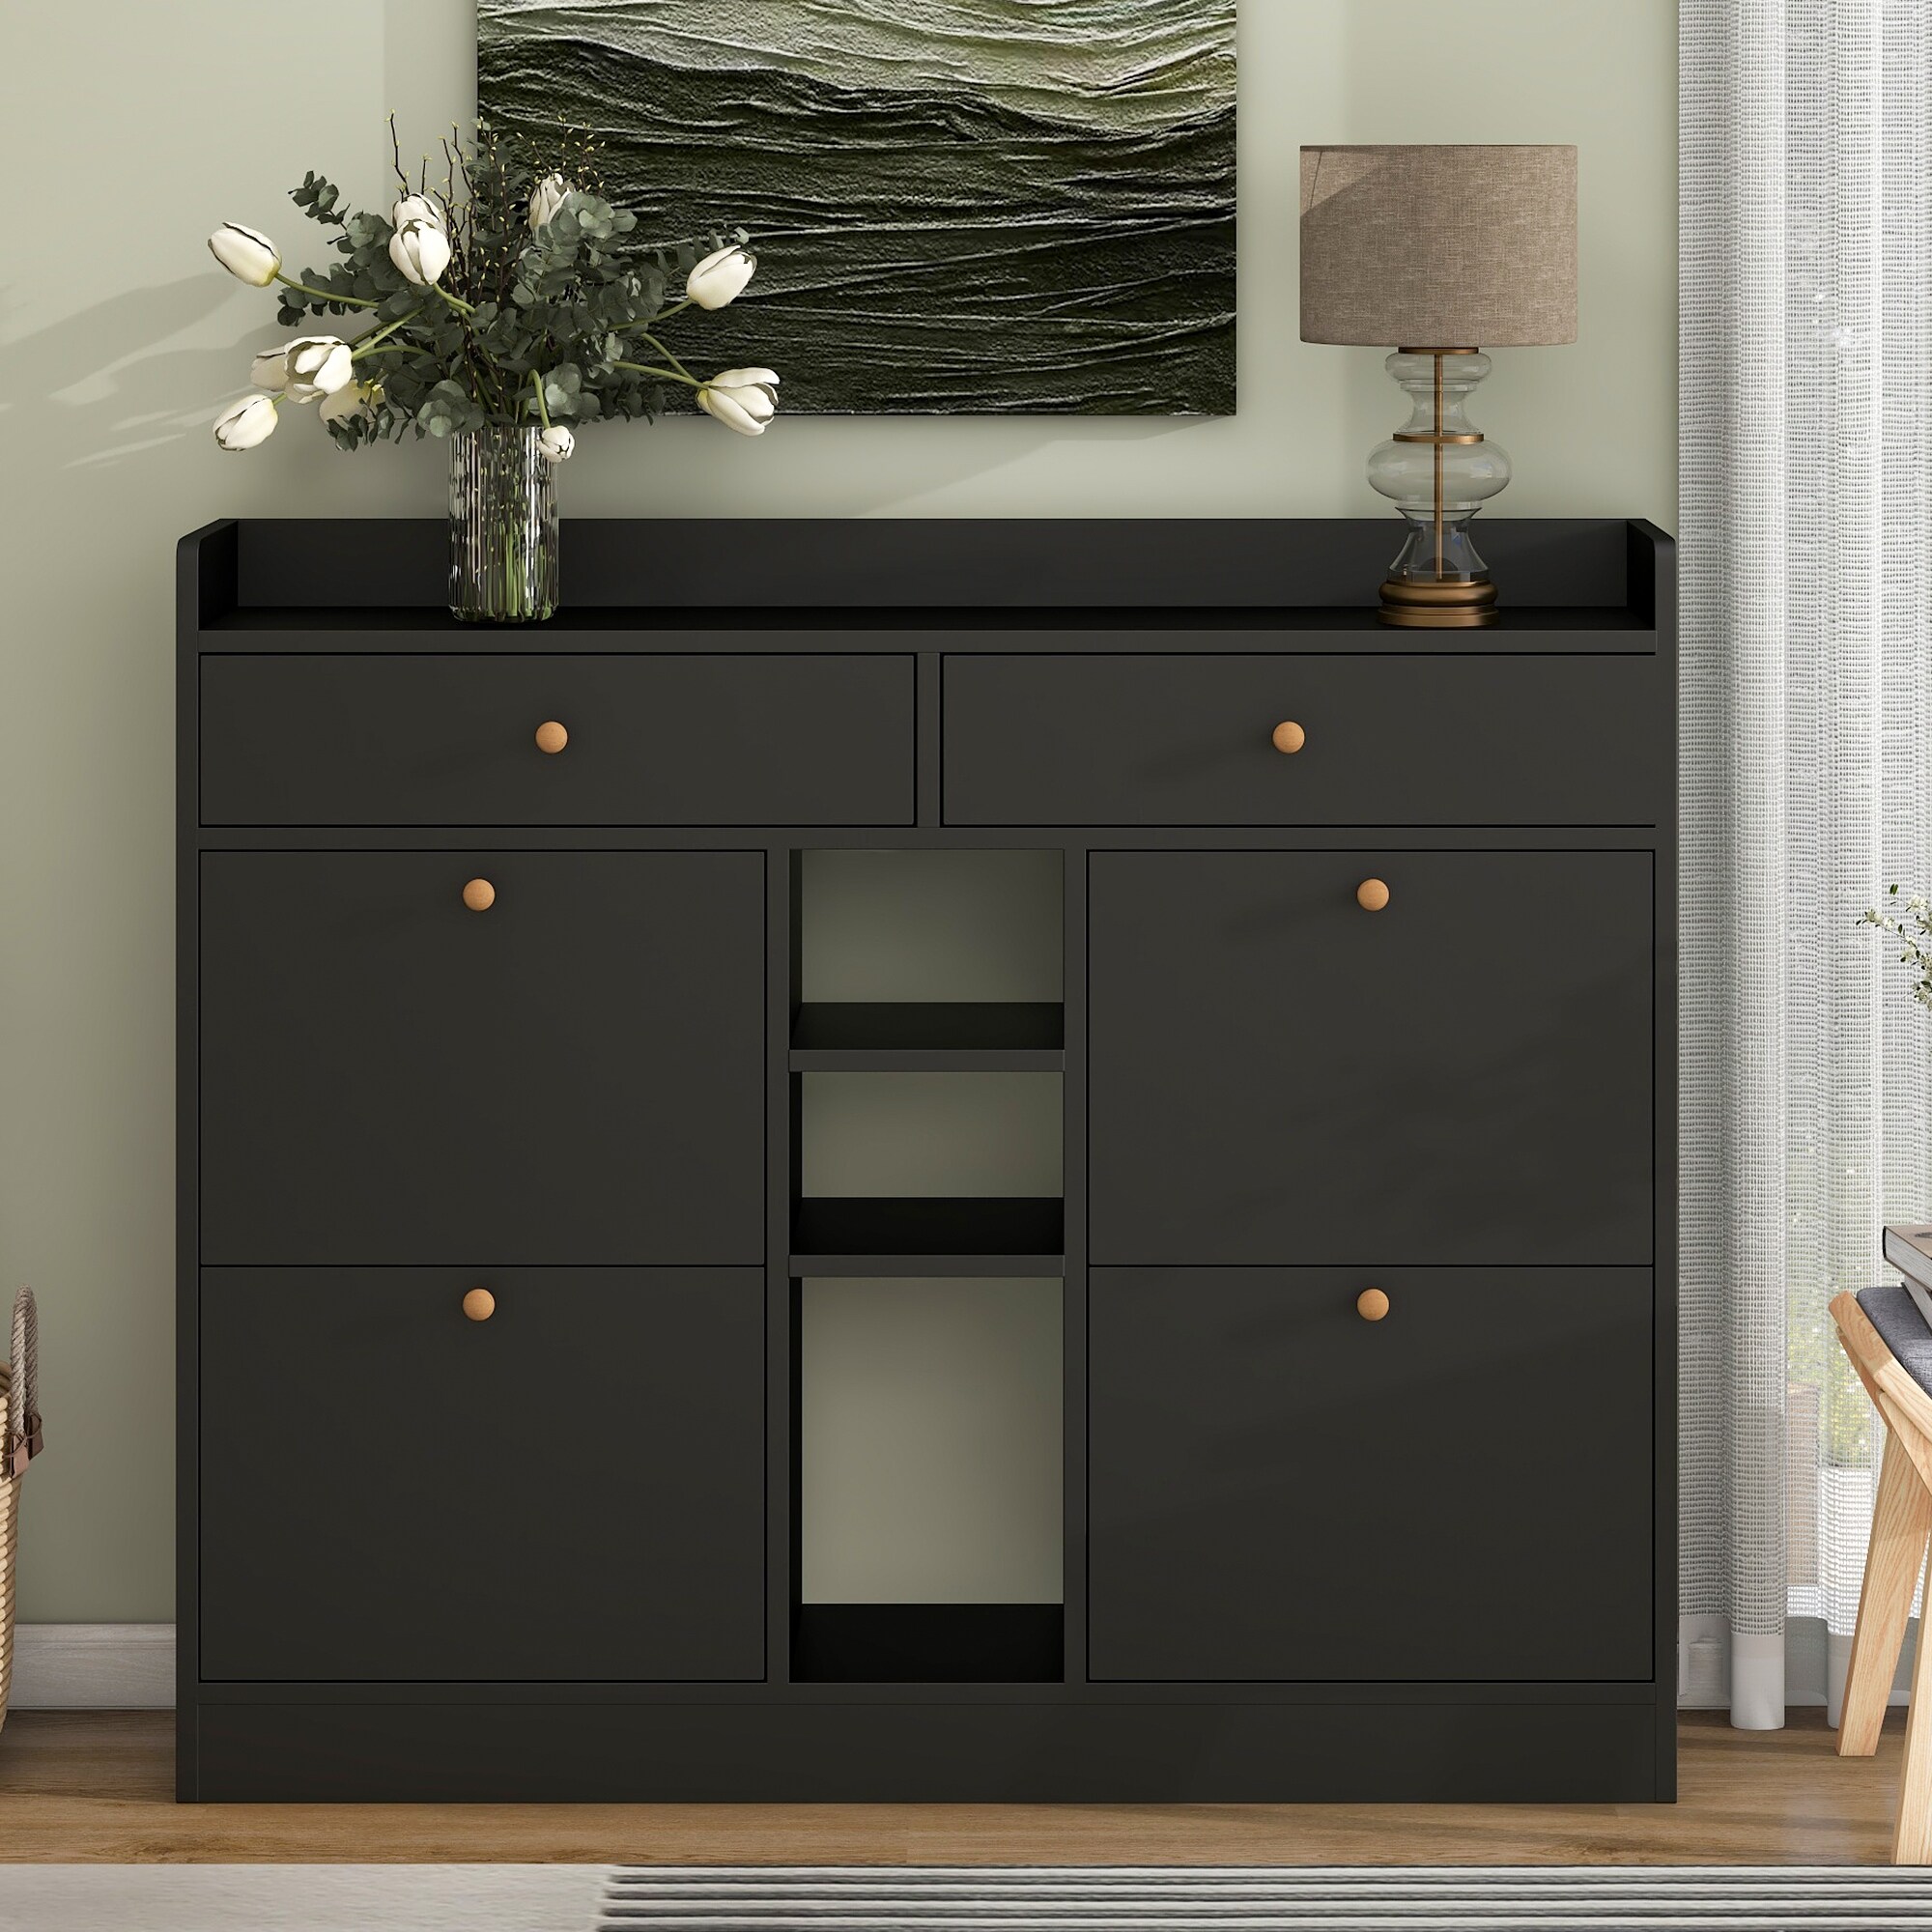 https://ak1.ostkcdn.com/images/products/is/images/direct/e0d4507c8b0bc3d59f1d3784efdb8c4a0bdee490/Modern-Shoe-Cabinet-with-4-Flip-Drawers%2C-Multifunctional-2-Tier-Free-Standing-Shoe-Rack-with-2-Drawers%2C-for-Entrance-Hallway.jpg